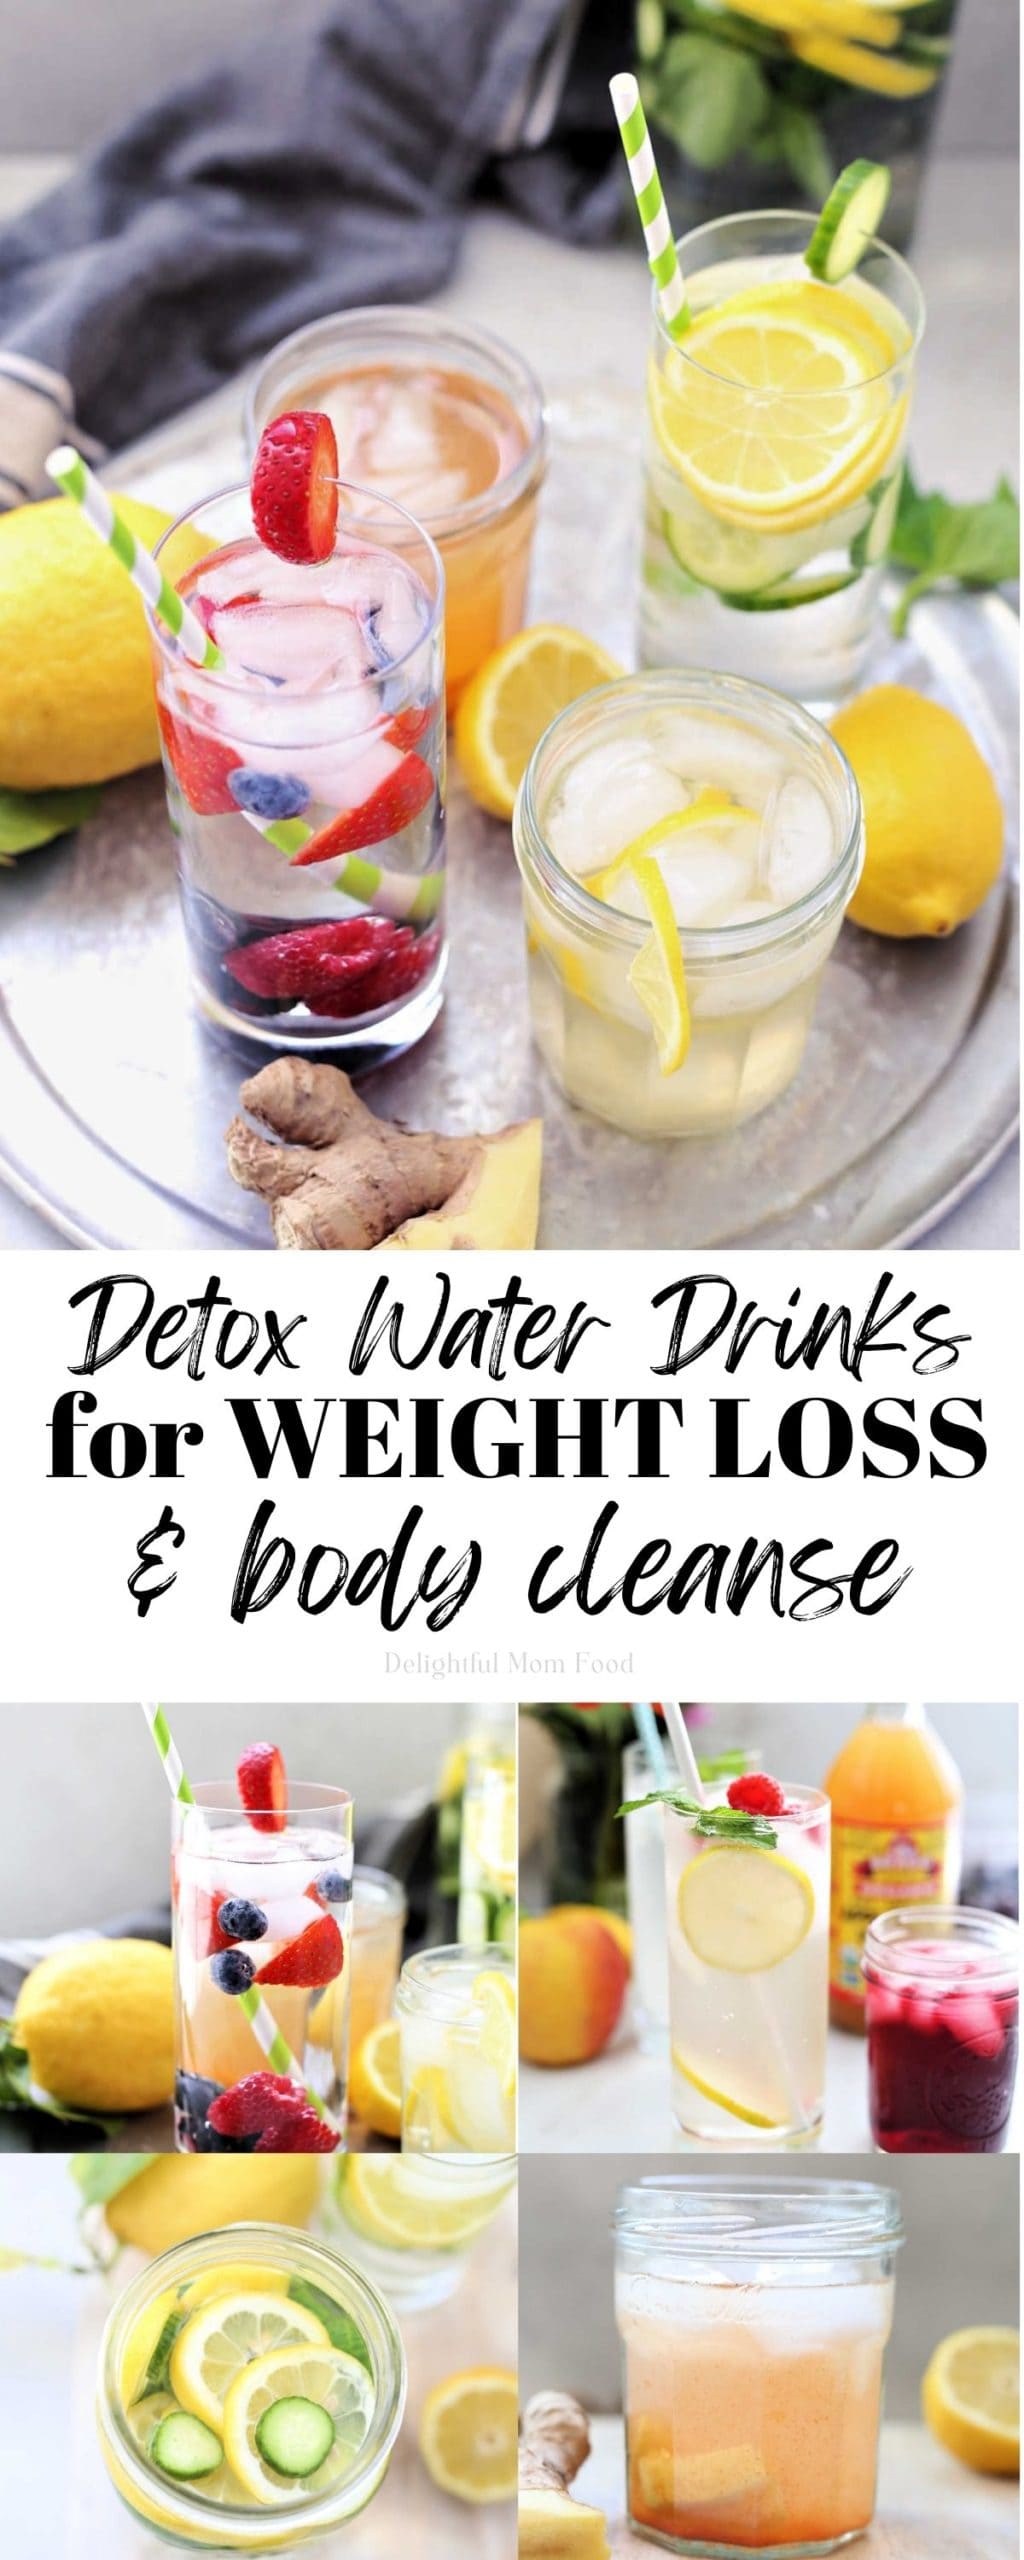 Body cleanse for weight loss